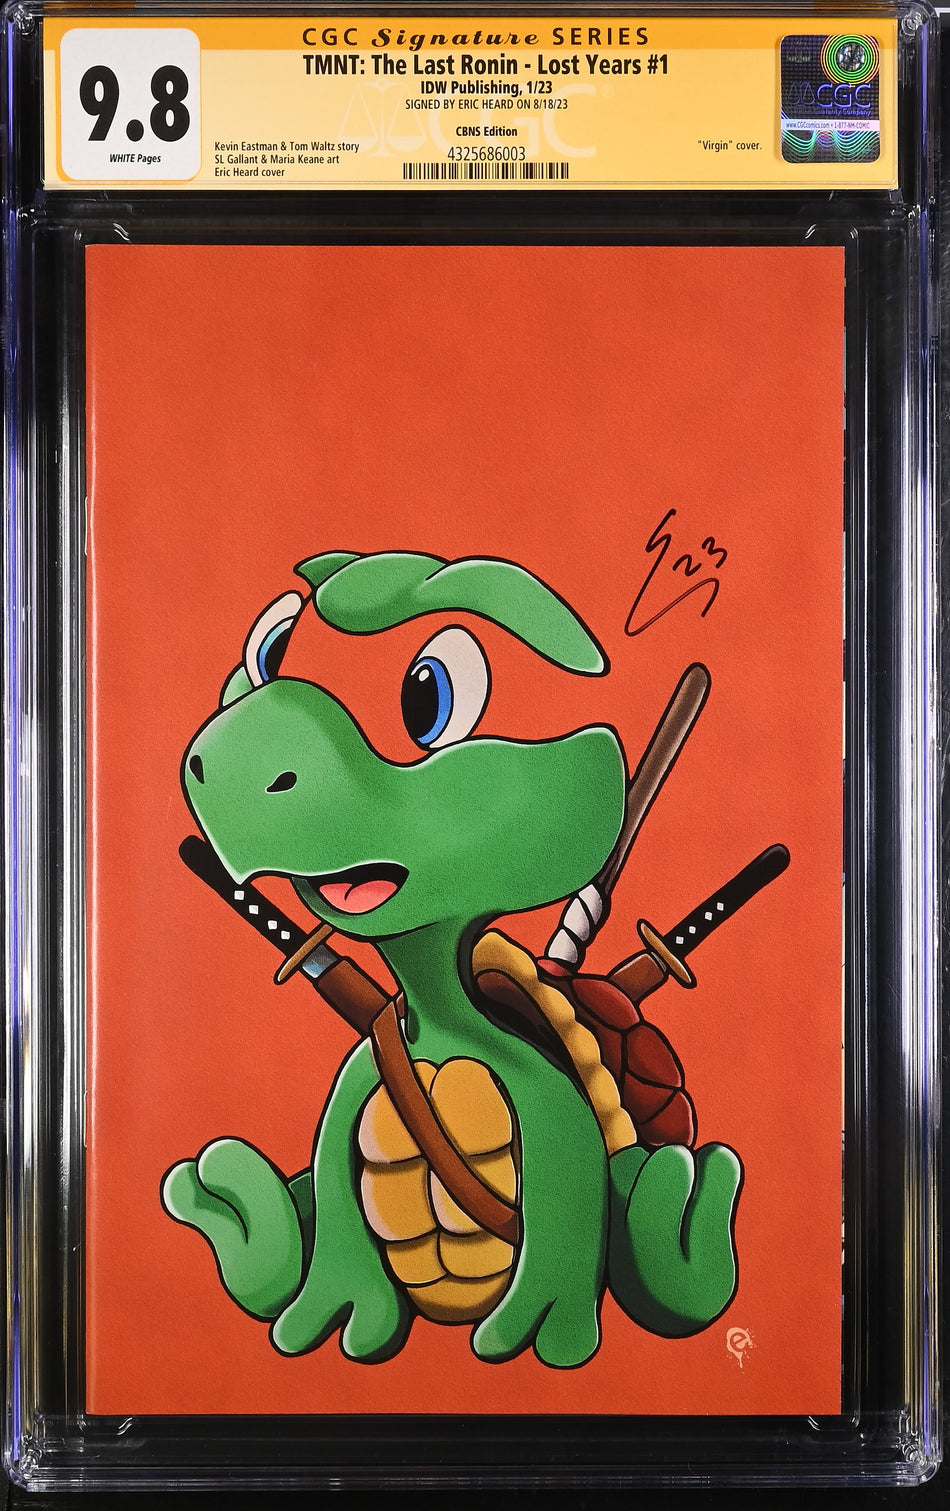 TMNT Last Ronin the Lost Years #1 SIGNED Michelangelo baby Virgin Negative Eric Heard Variant [Limited Edition 777] Store Exclusive CGC 9.8